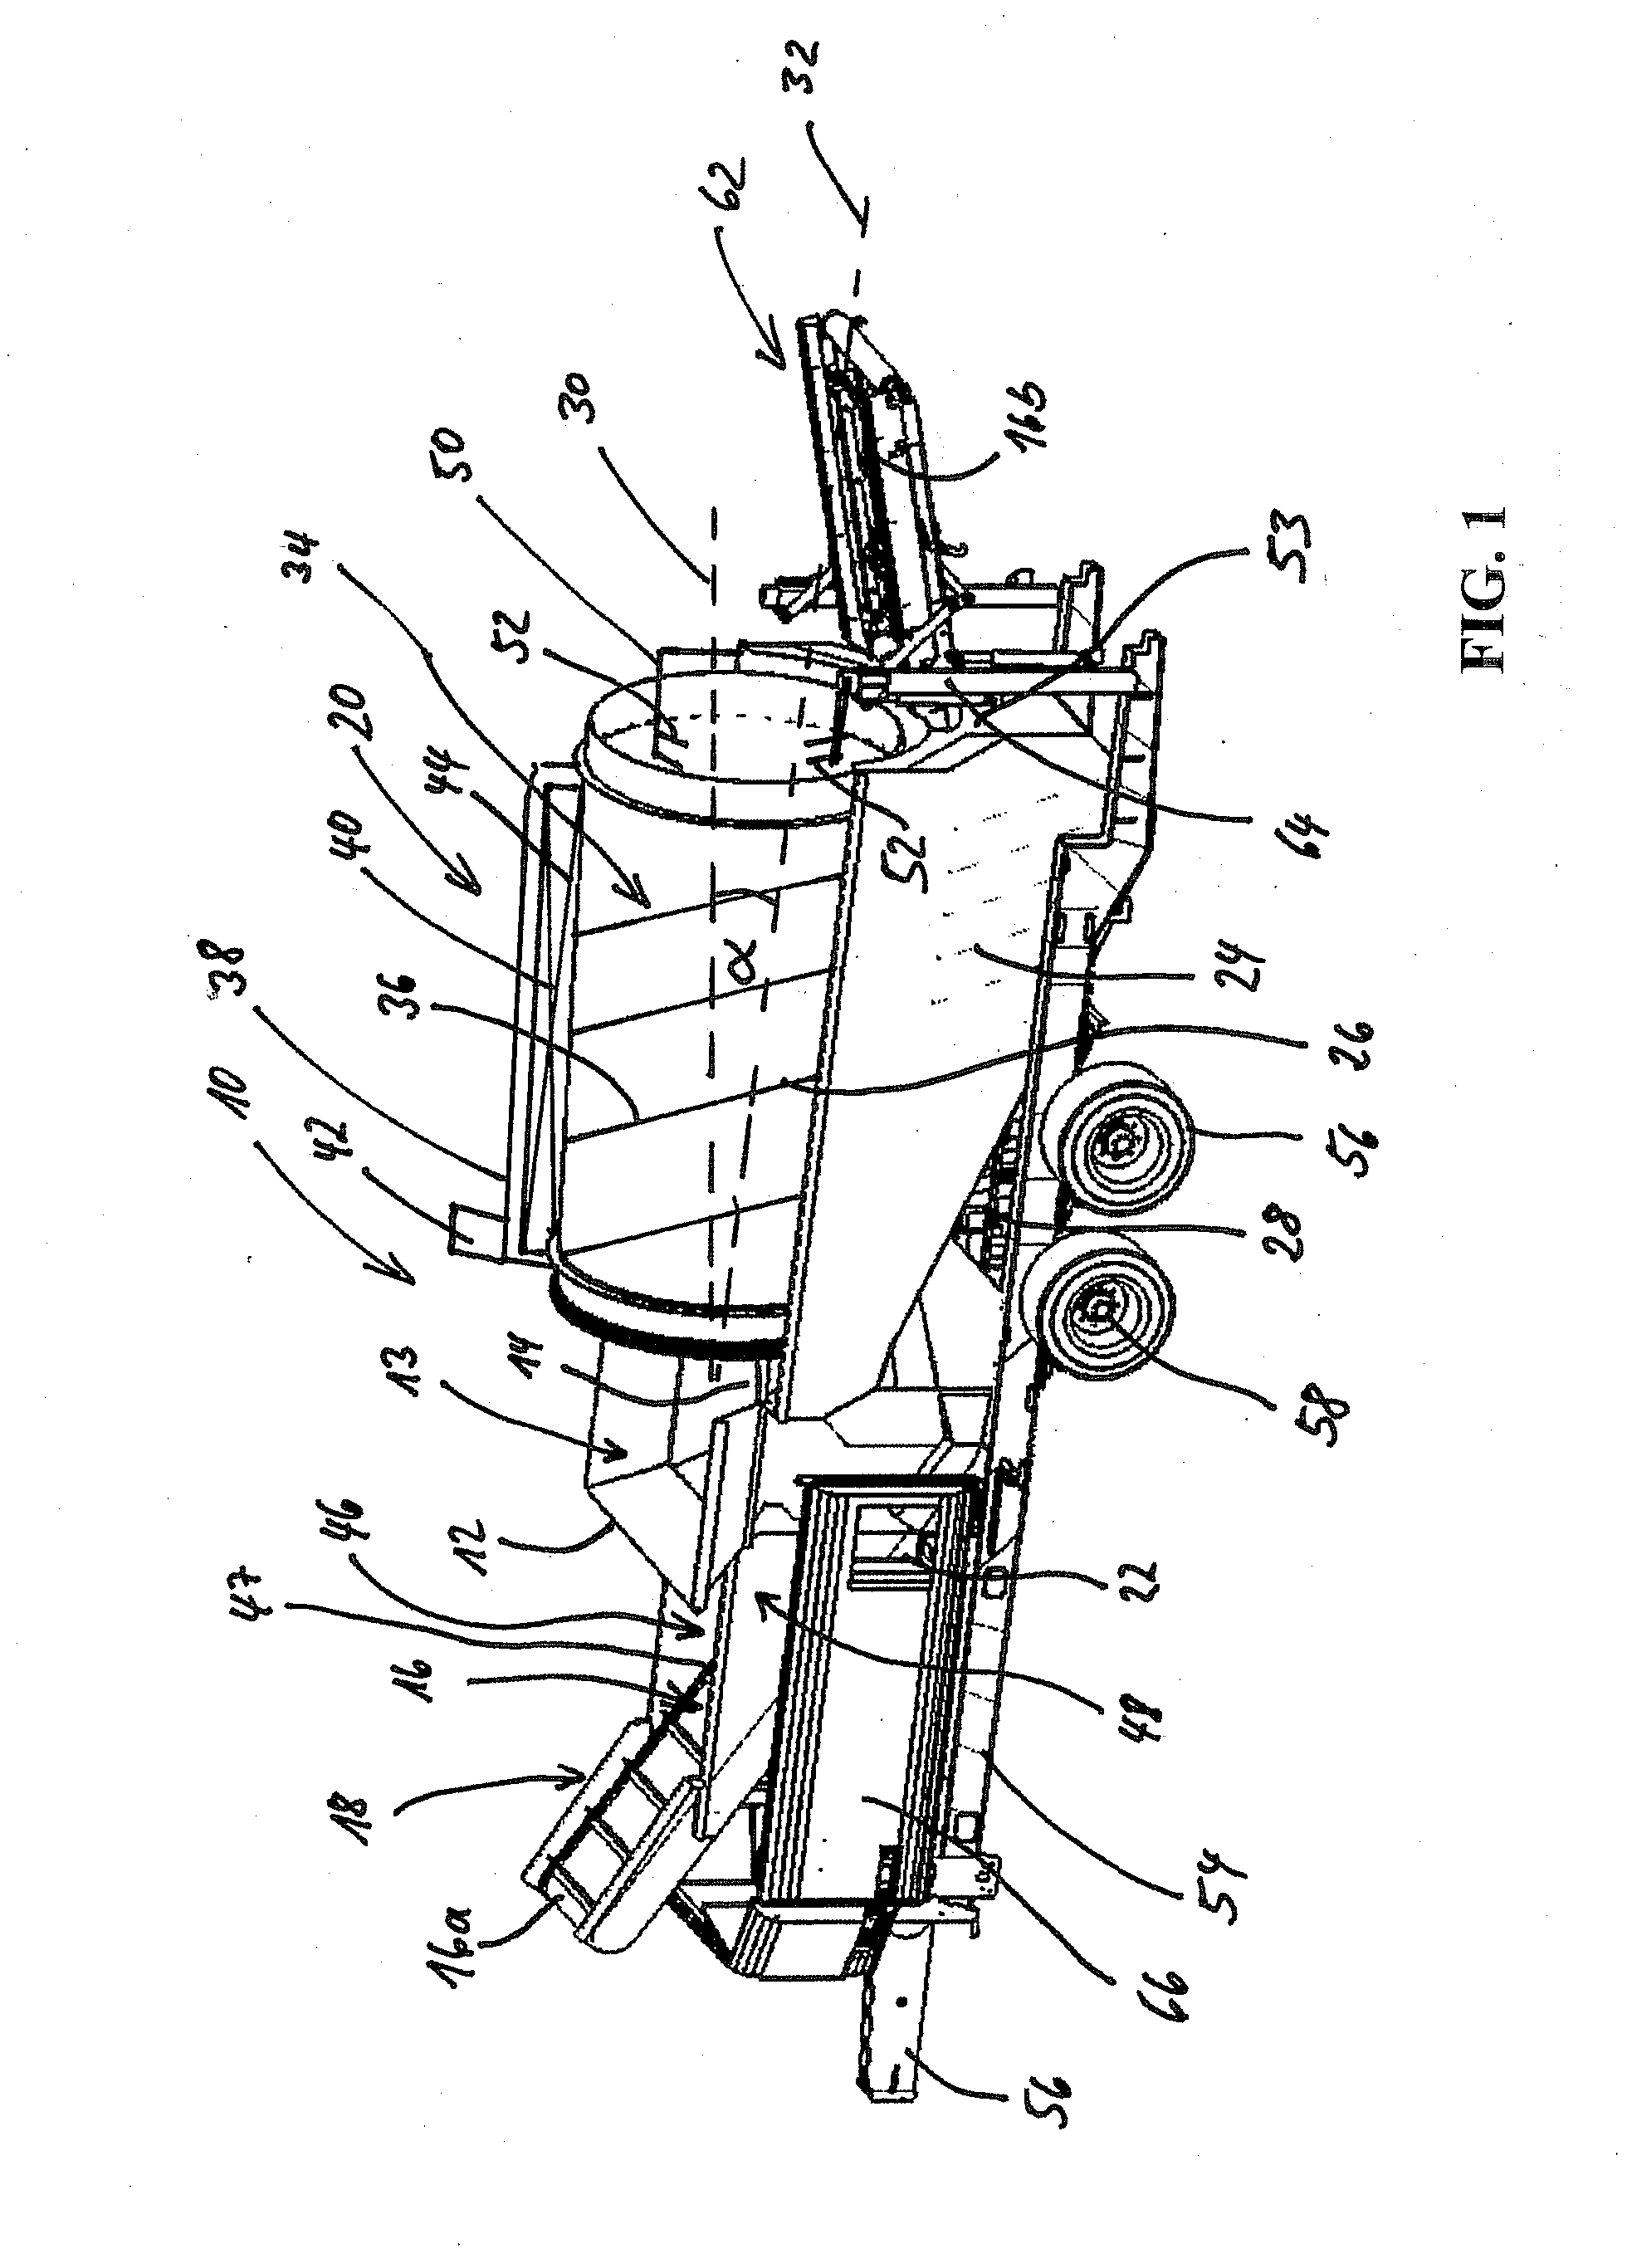 Apparatus for cleaning field crops